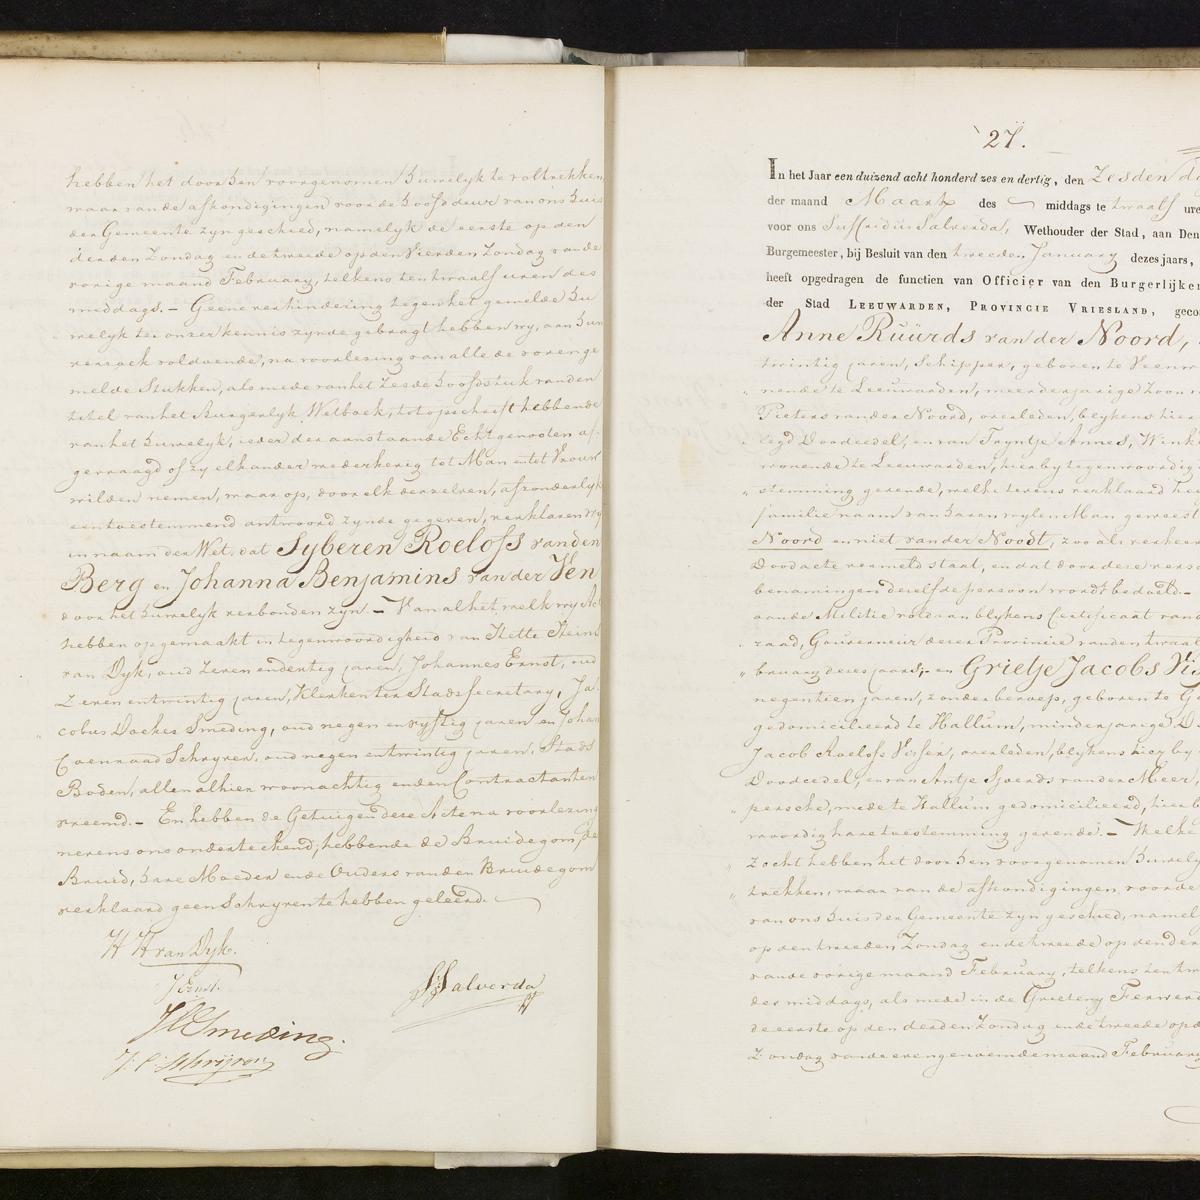 Civil registry of marriages, Leeuwarden, 1836, records 26-27